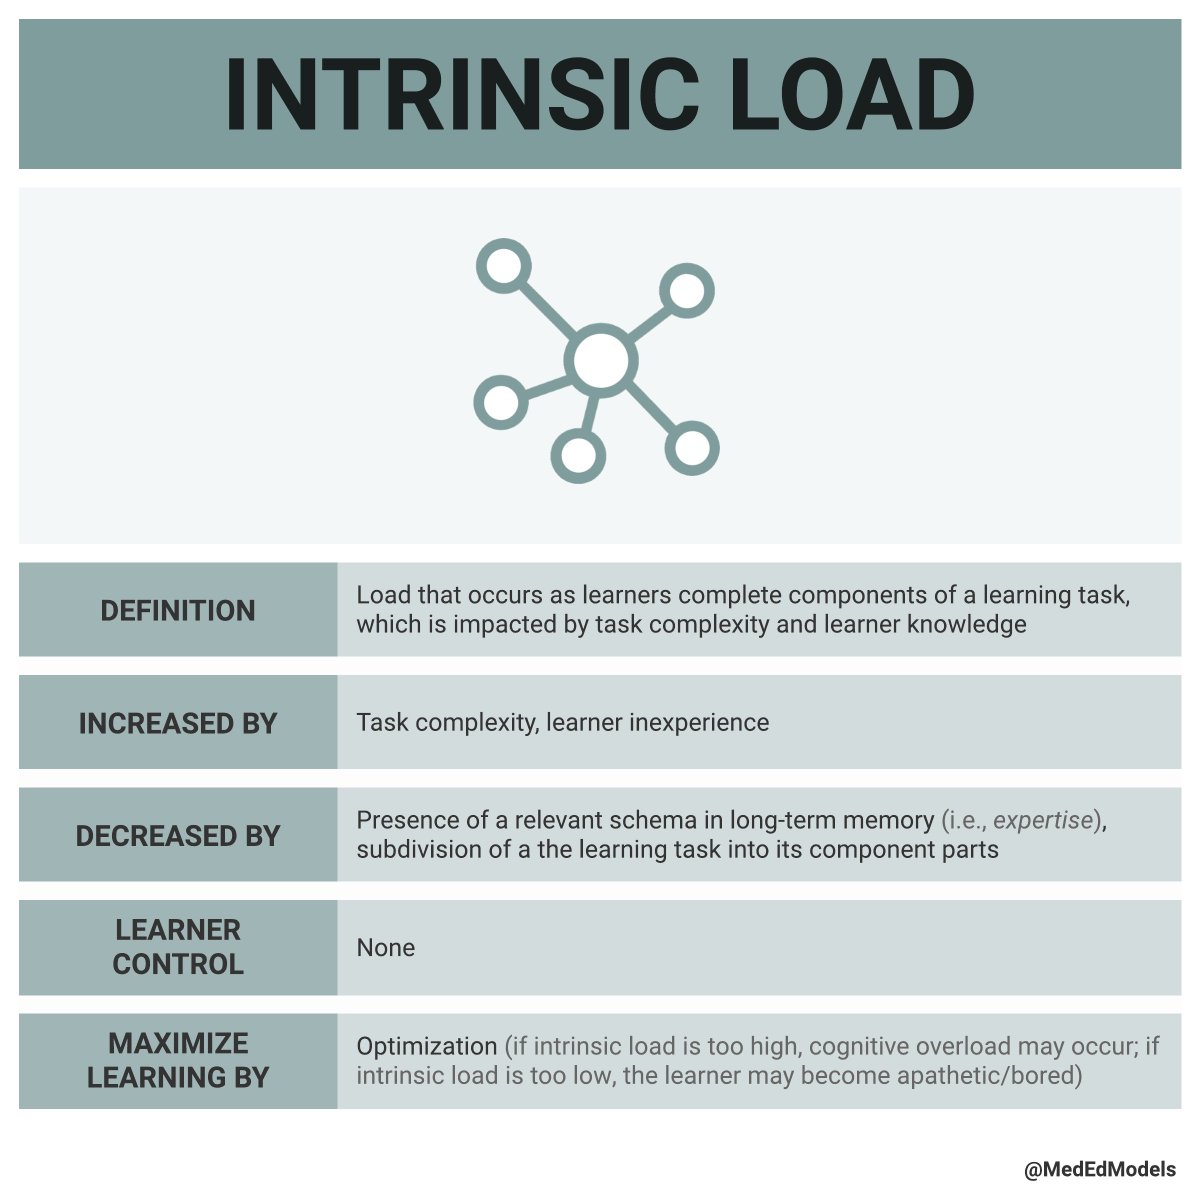 Intrinsic load refers to the load that occurs as learners complete components of a learning task, which is impacted by task complexity and learner knowledge. See the image below for tips on how to manipulate intrinsic load to maximize learning!